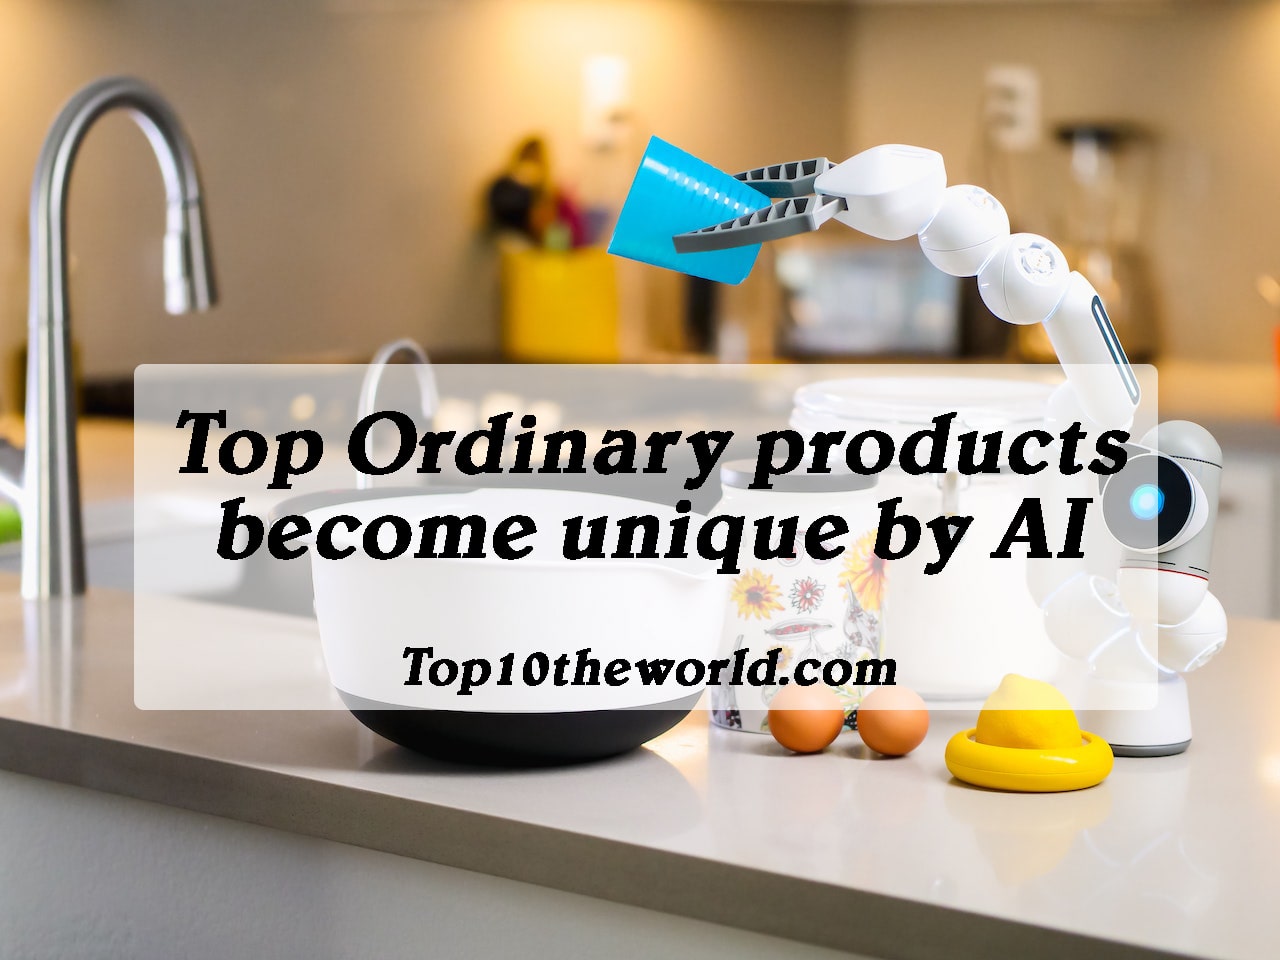 Top Ordinary products become unique by Ai